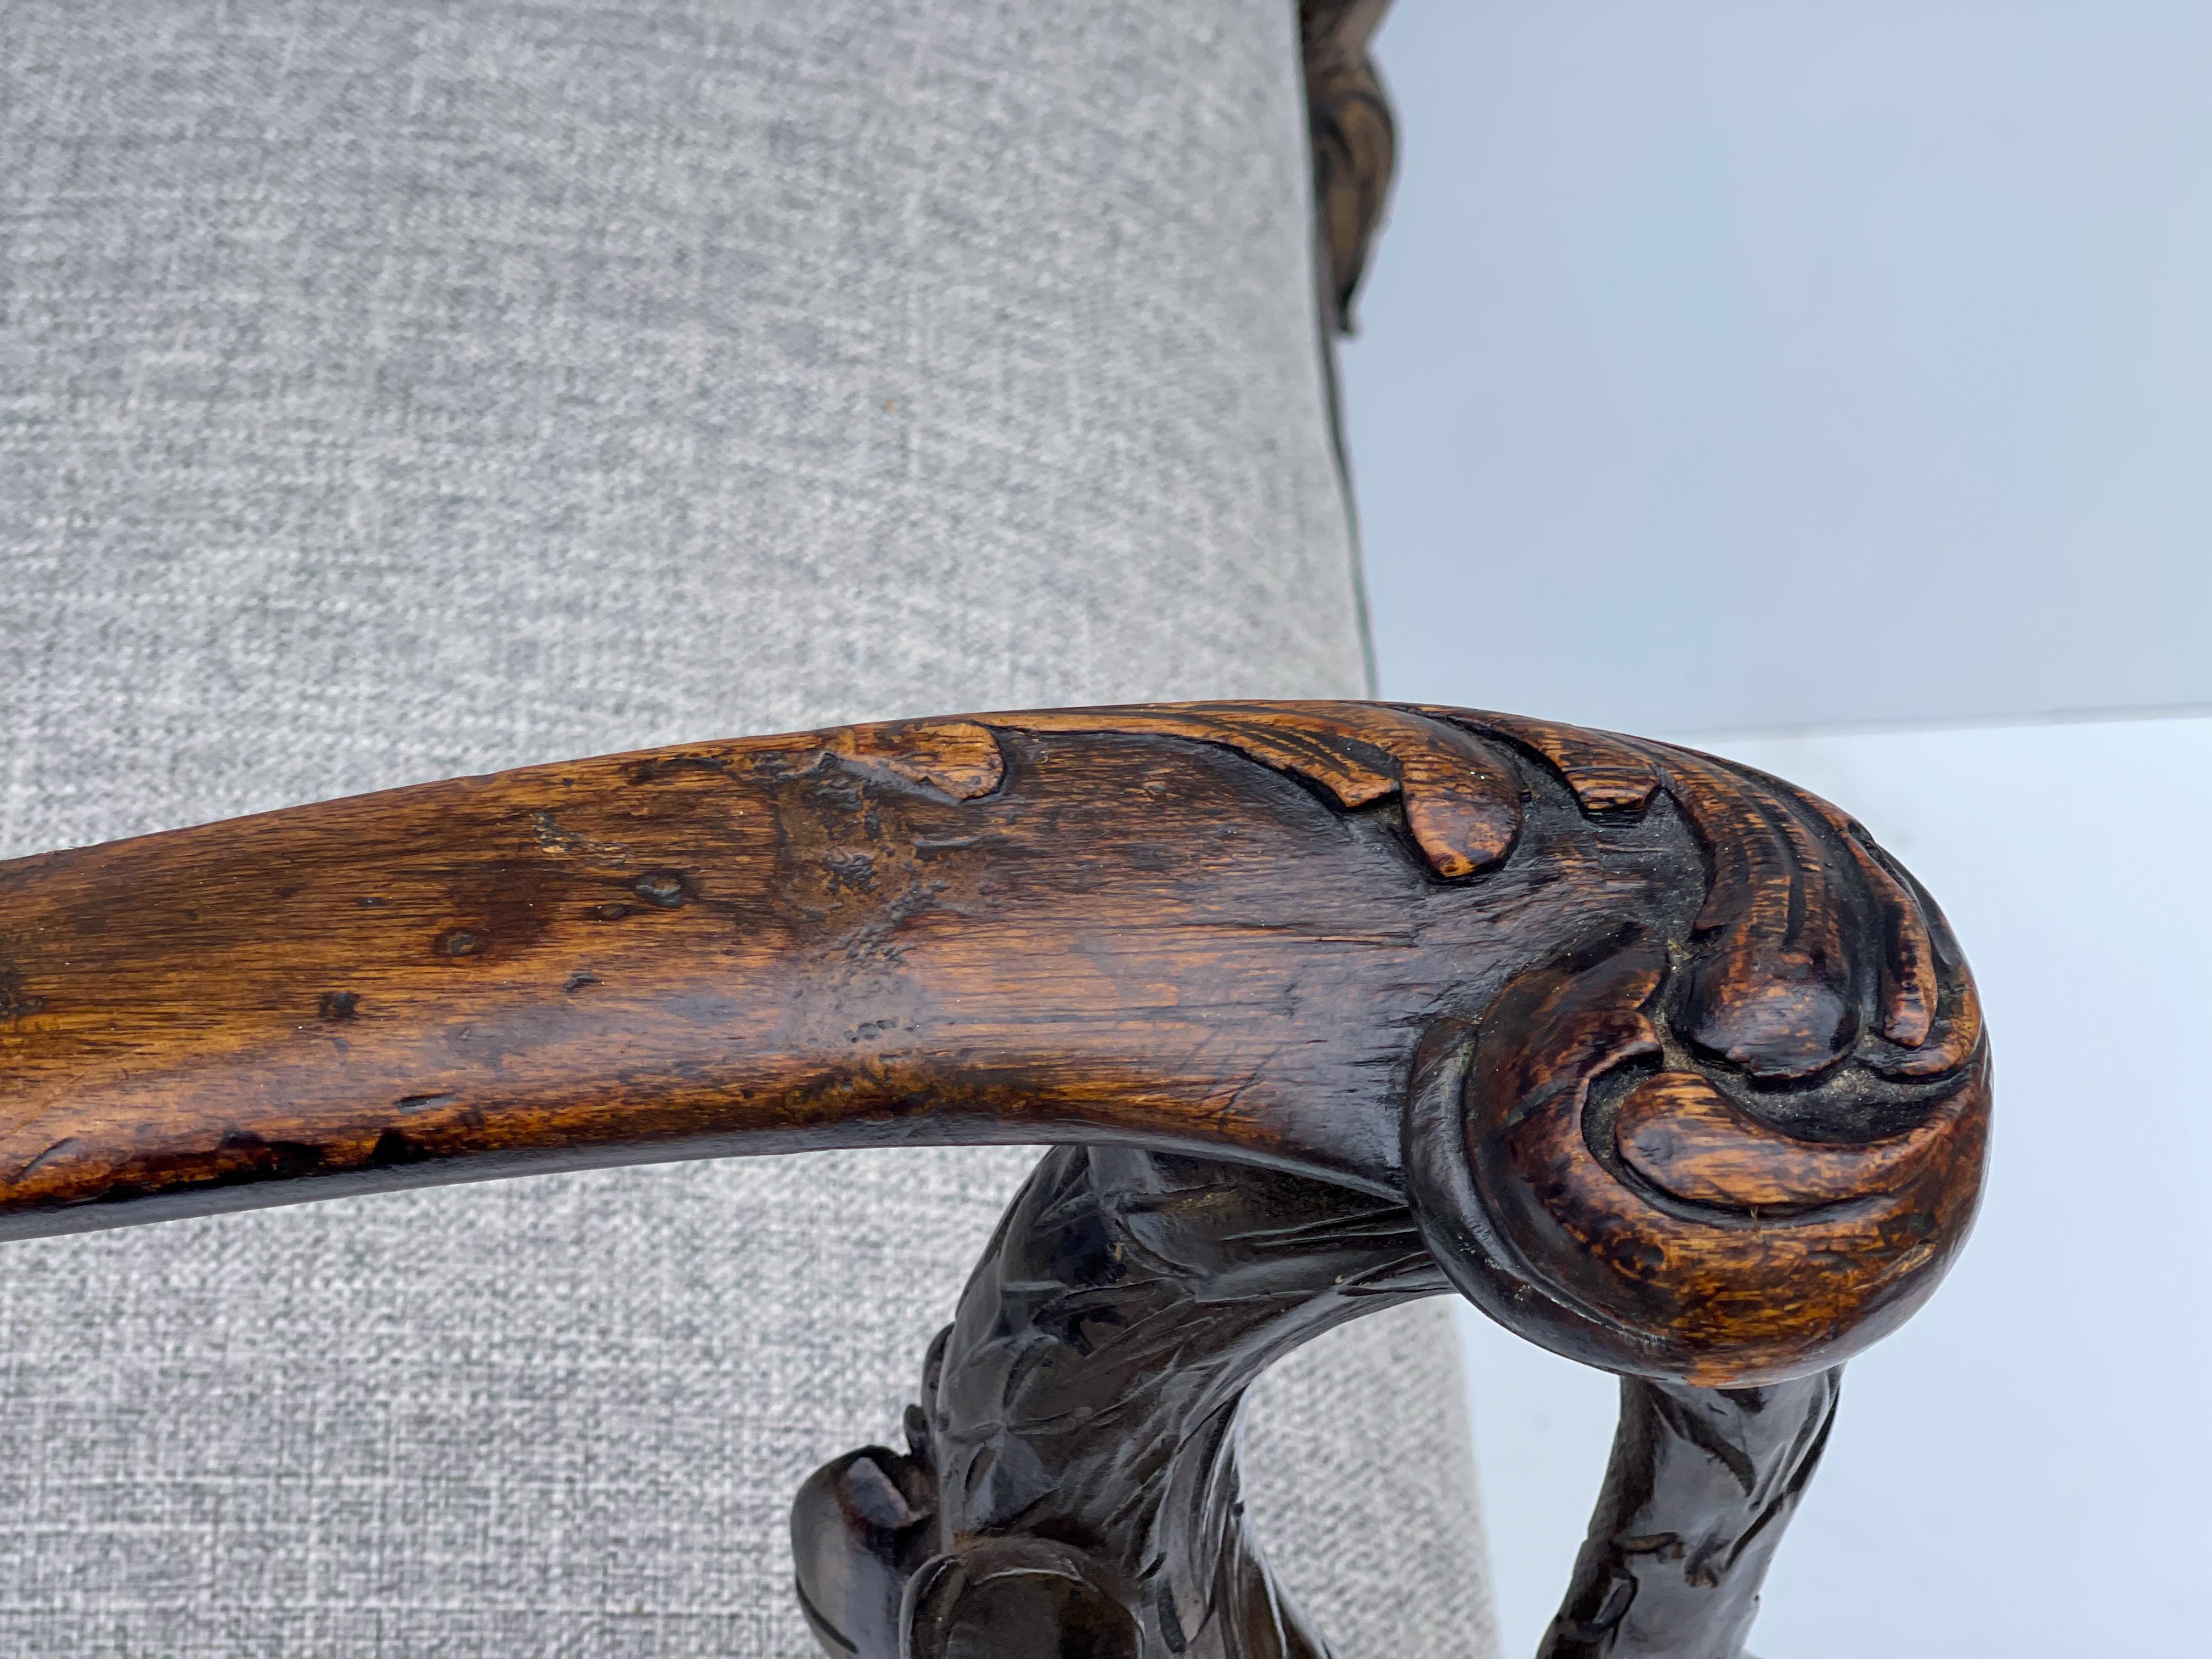 19th Century 19th-C. Italian Neo-Classical Style Carved Walnut Arm Chair with Swan Form Arms For Sale